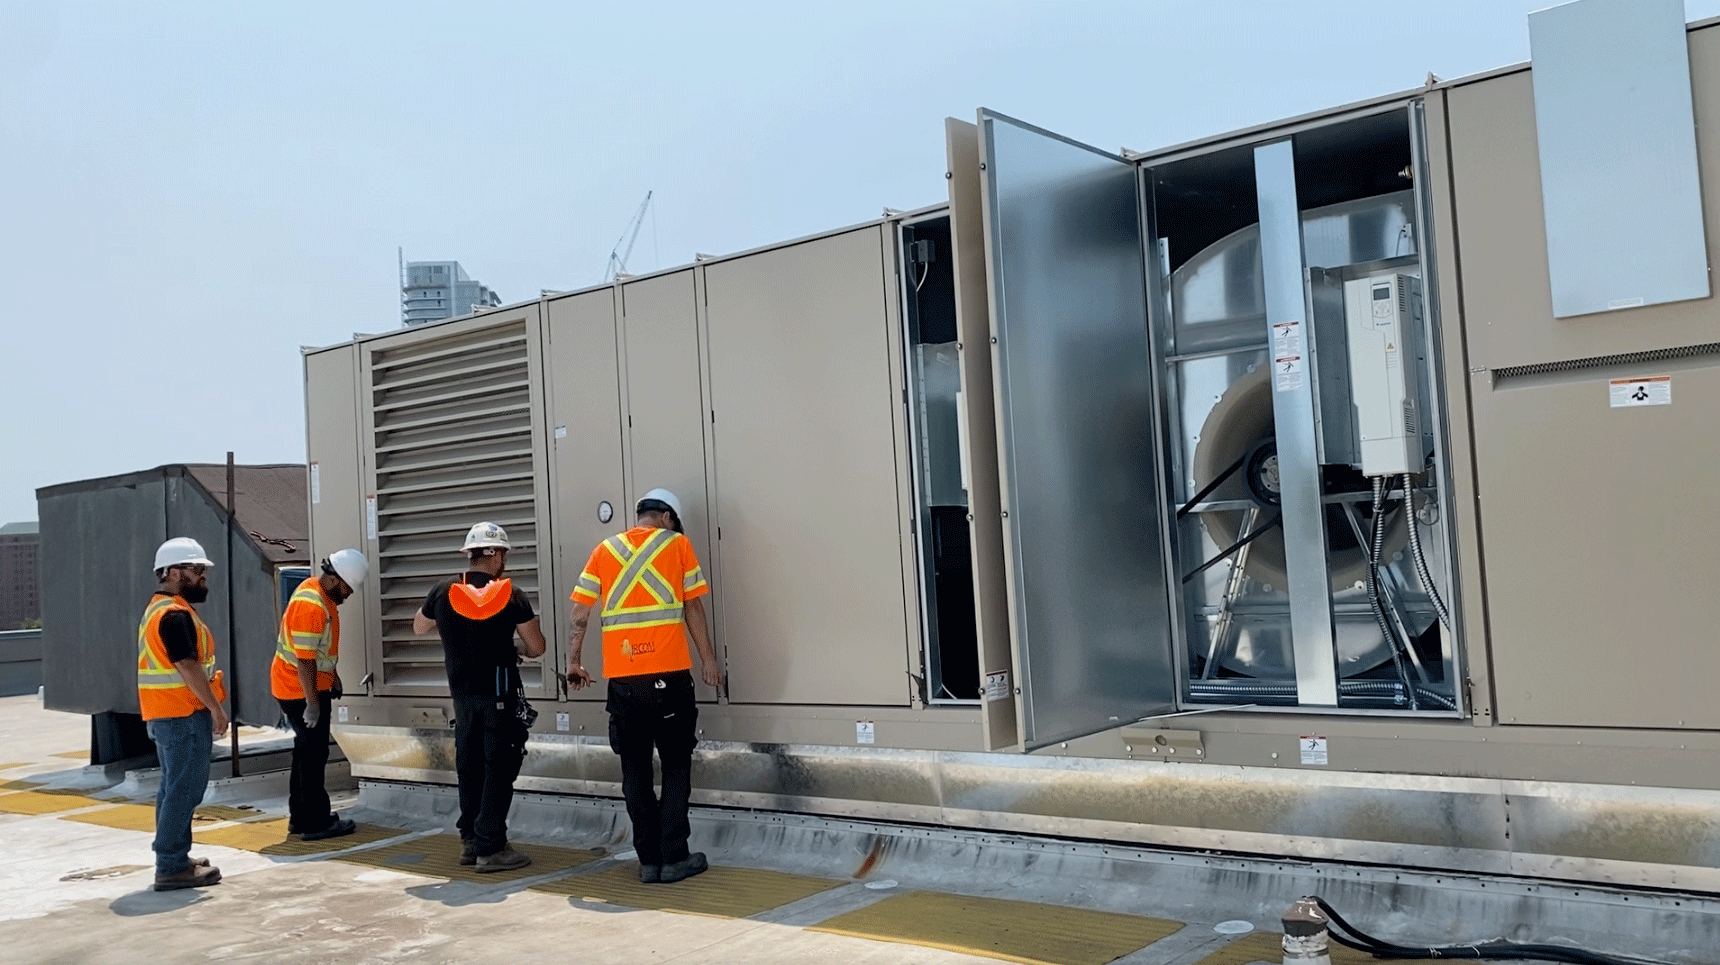 A Daikin Rooftop Unit Lifted Onto A Building.